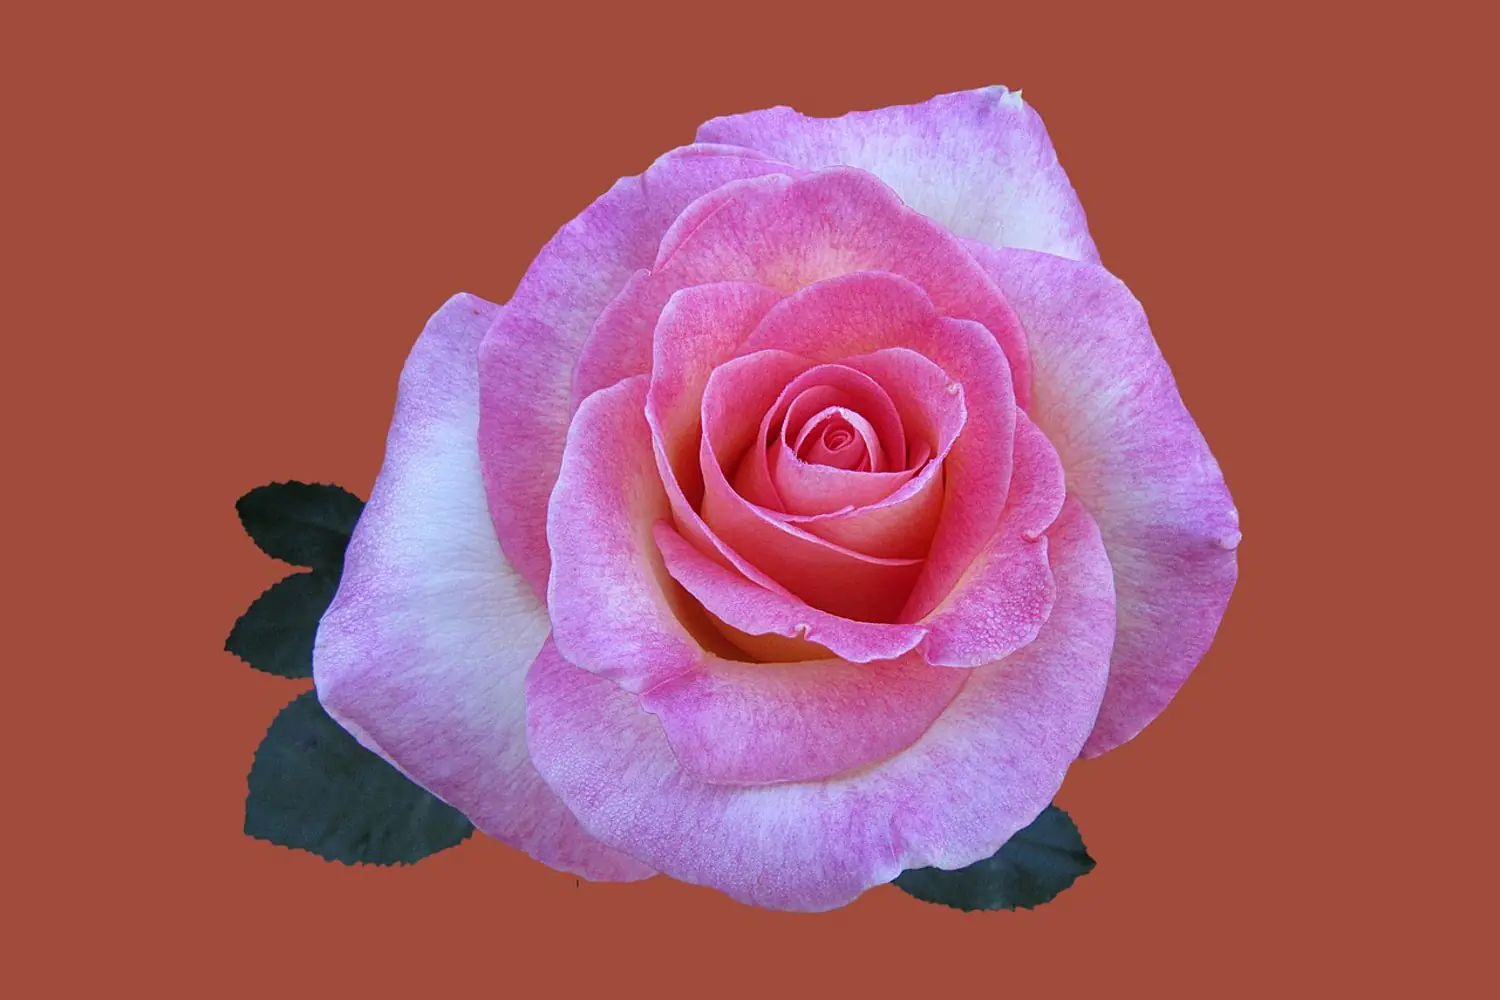 Wall Mural Photo Wallpaper Rose in pink XXL